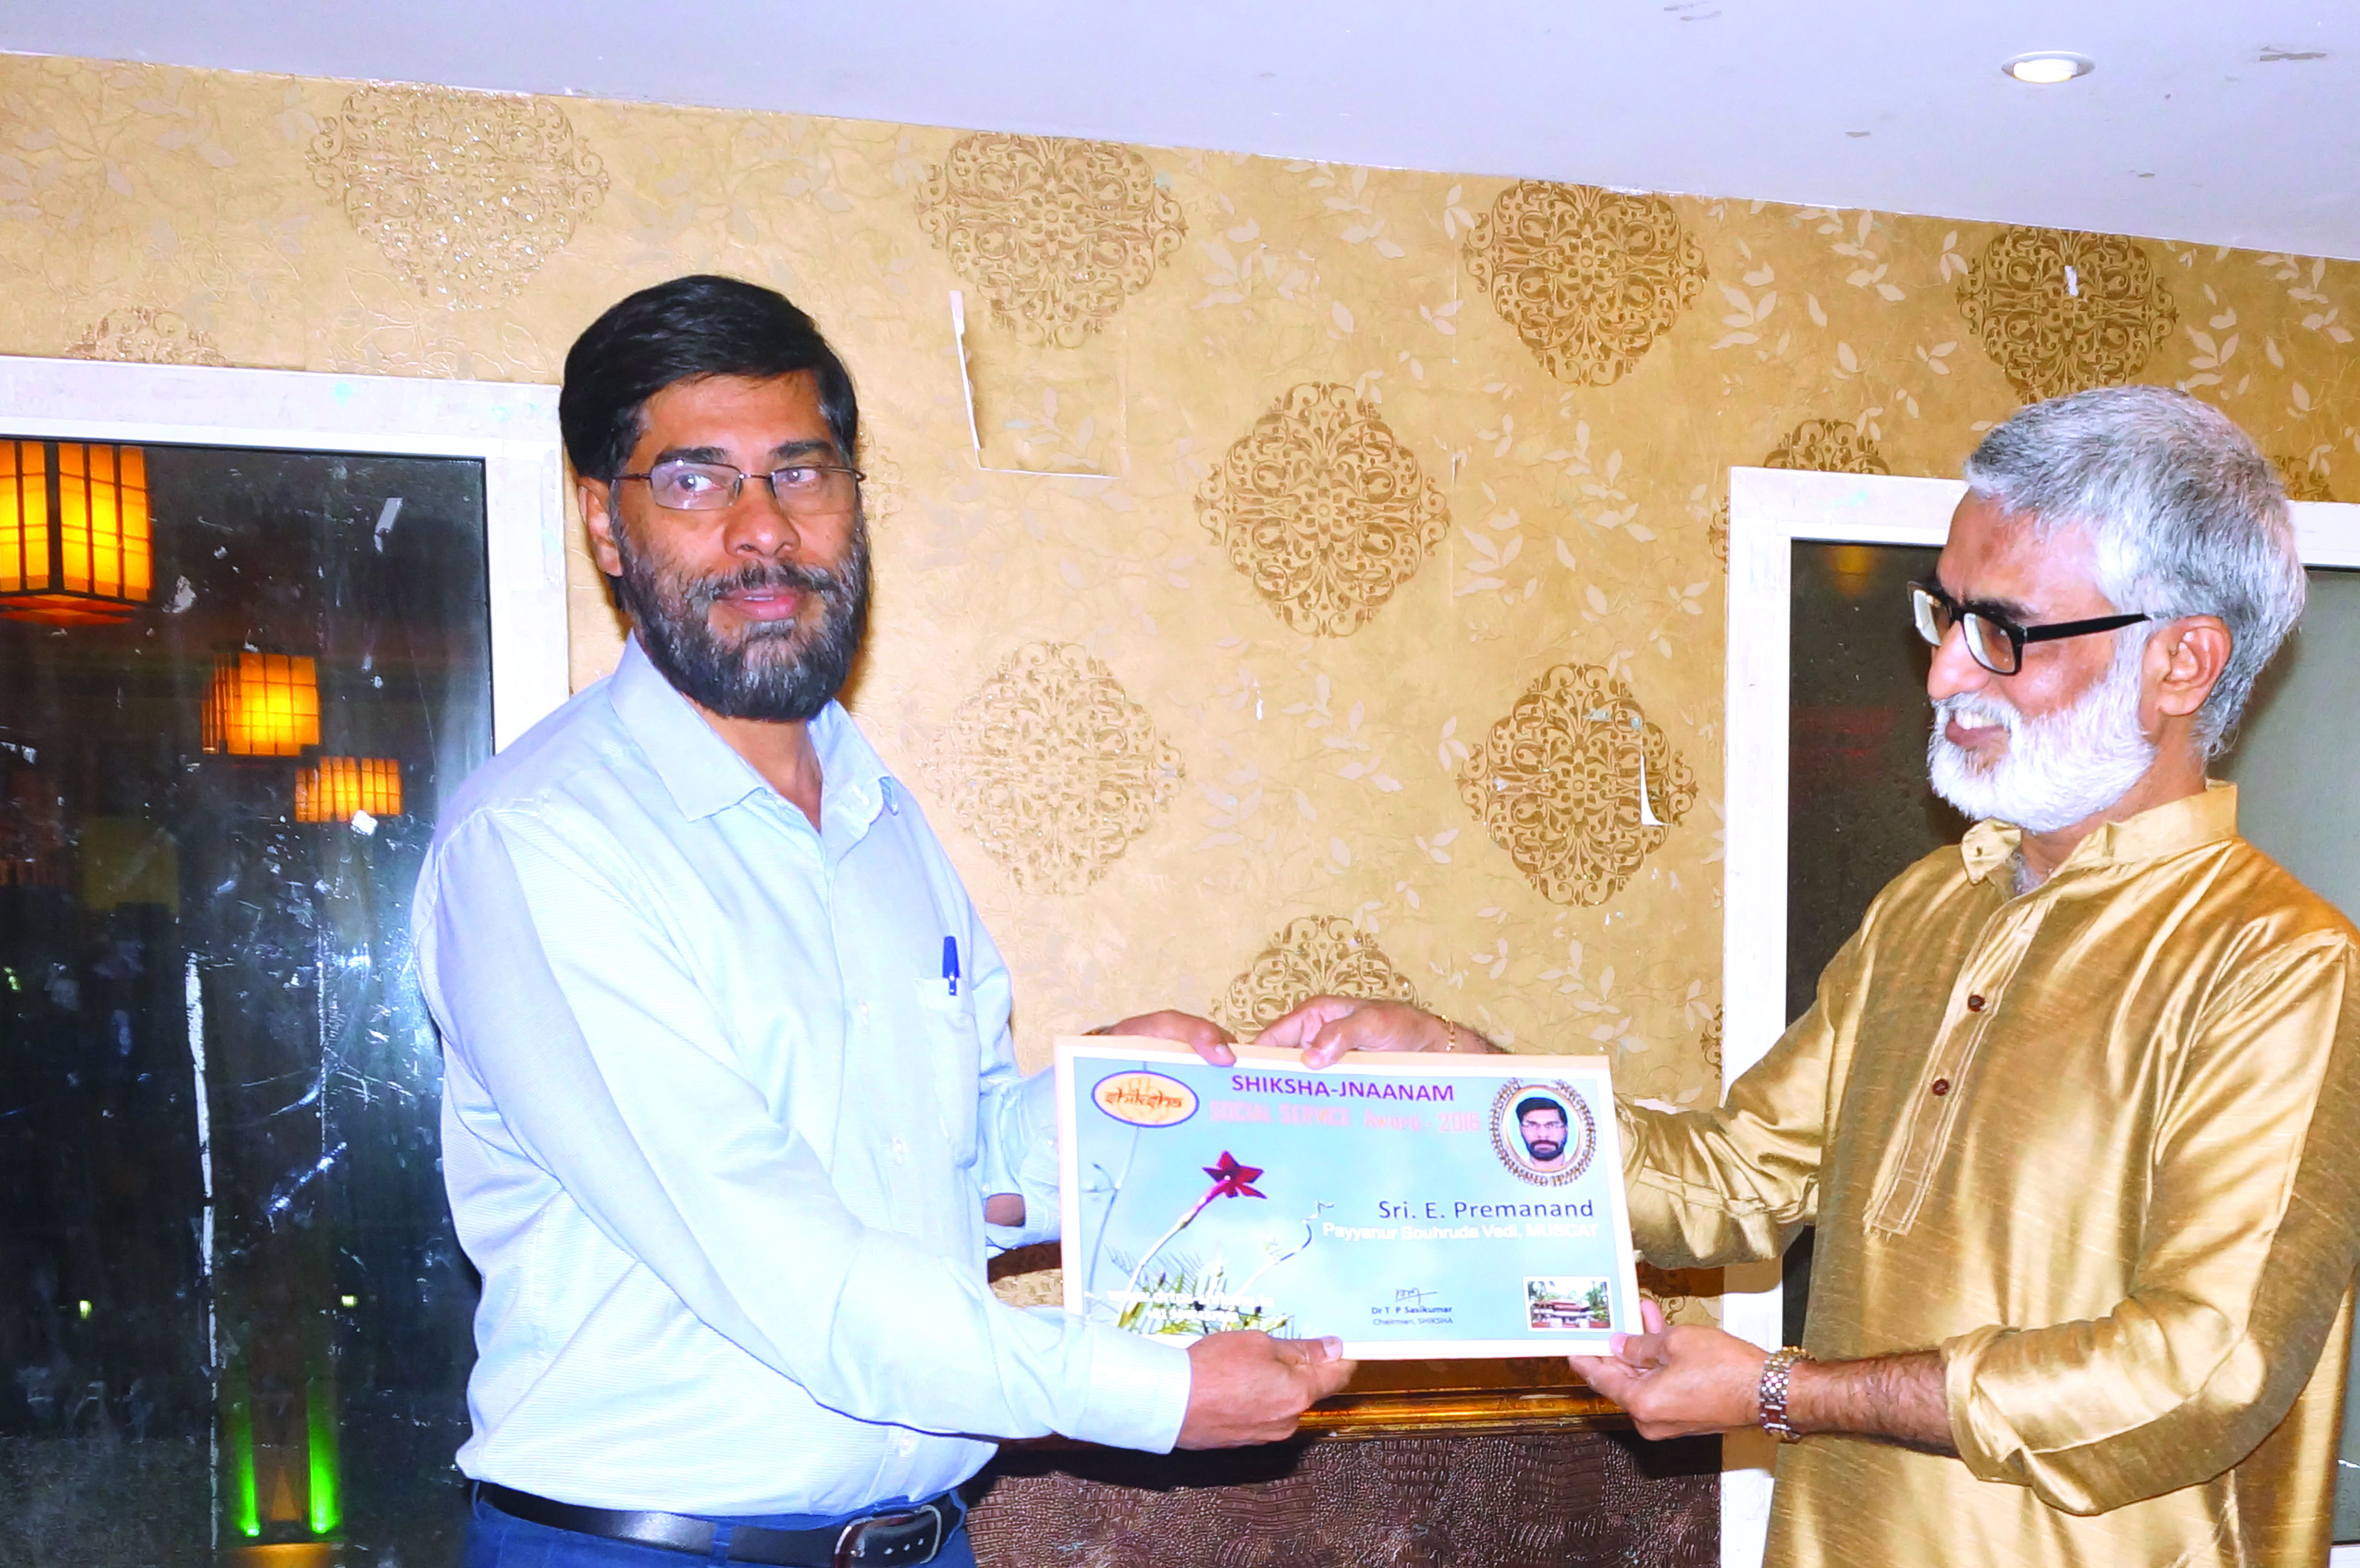 Indian expat in Oman wins award for social service